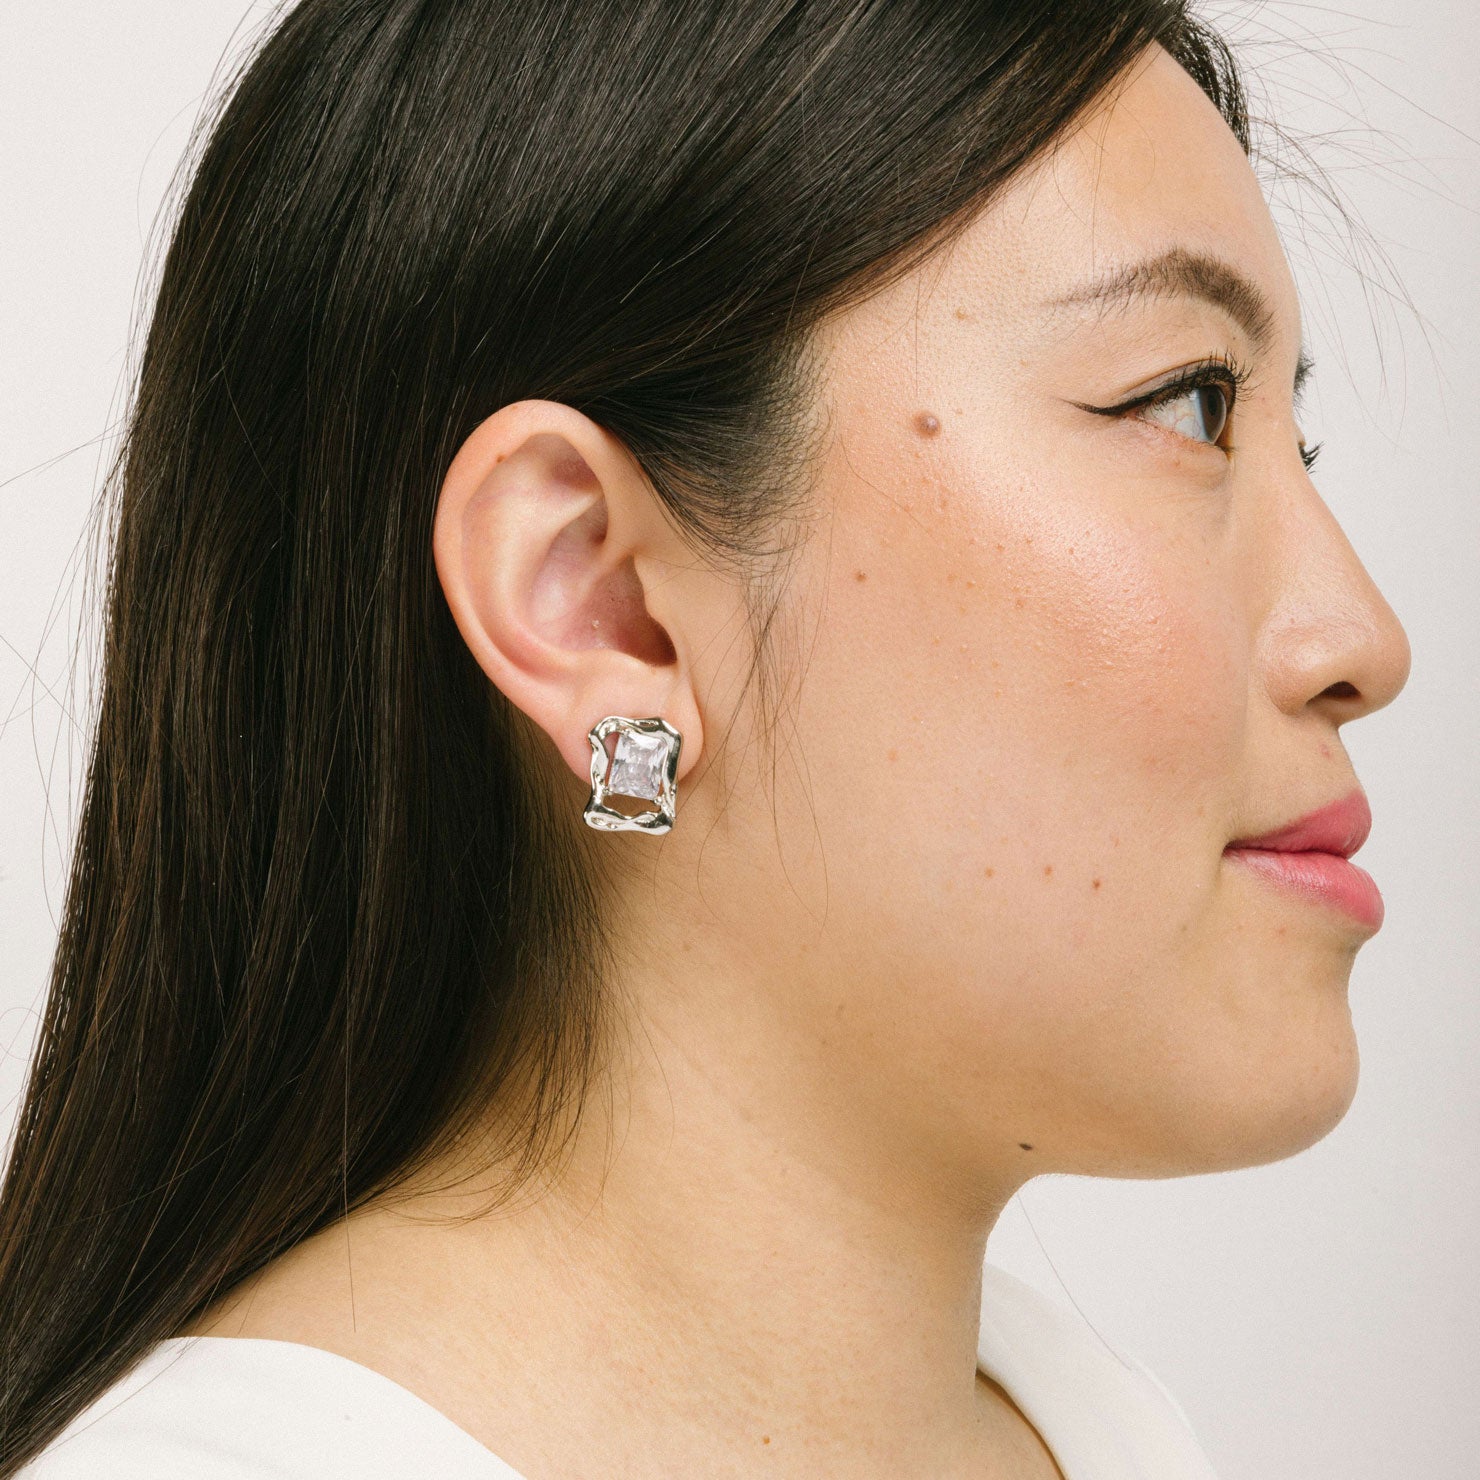 A model wearing the Valerie Clip On Earrings in Silver offer a secure hold for up to 12 hours of comfortable wear. Featuring a padded clip-on design, these earrings are ideal for all ear types, including those that are thick and large, sensitive, small and thin, or stretched and healing. Crafted with a silver tone copper alloy and cubic zirconia, each order includes one pair.